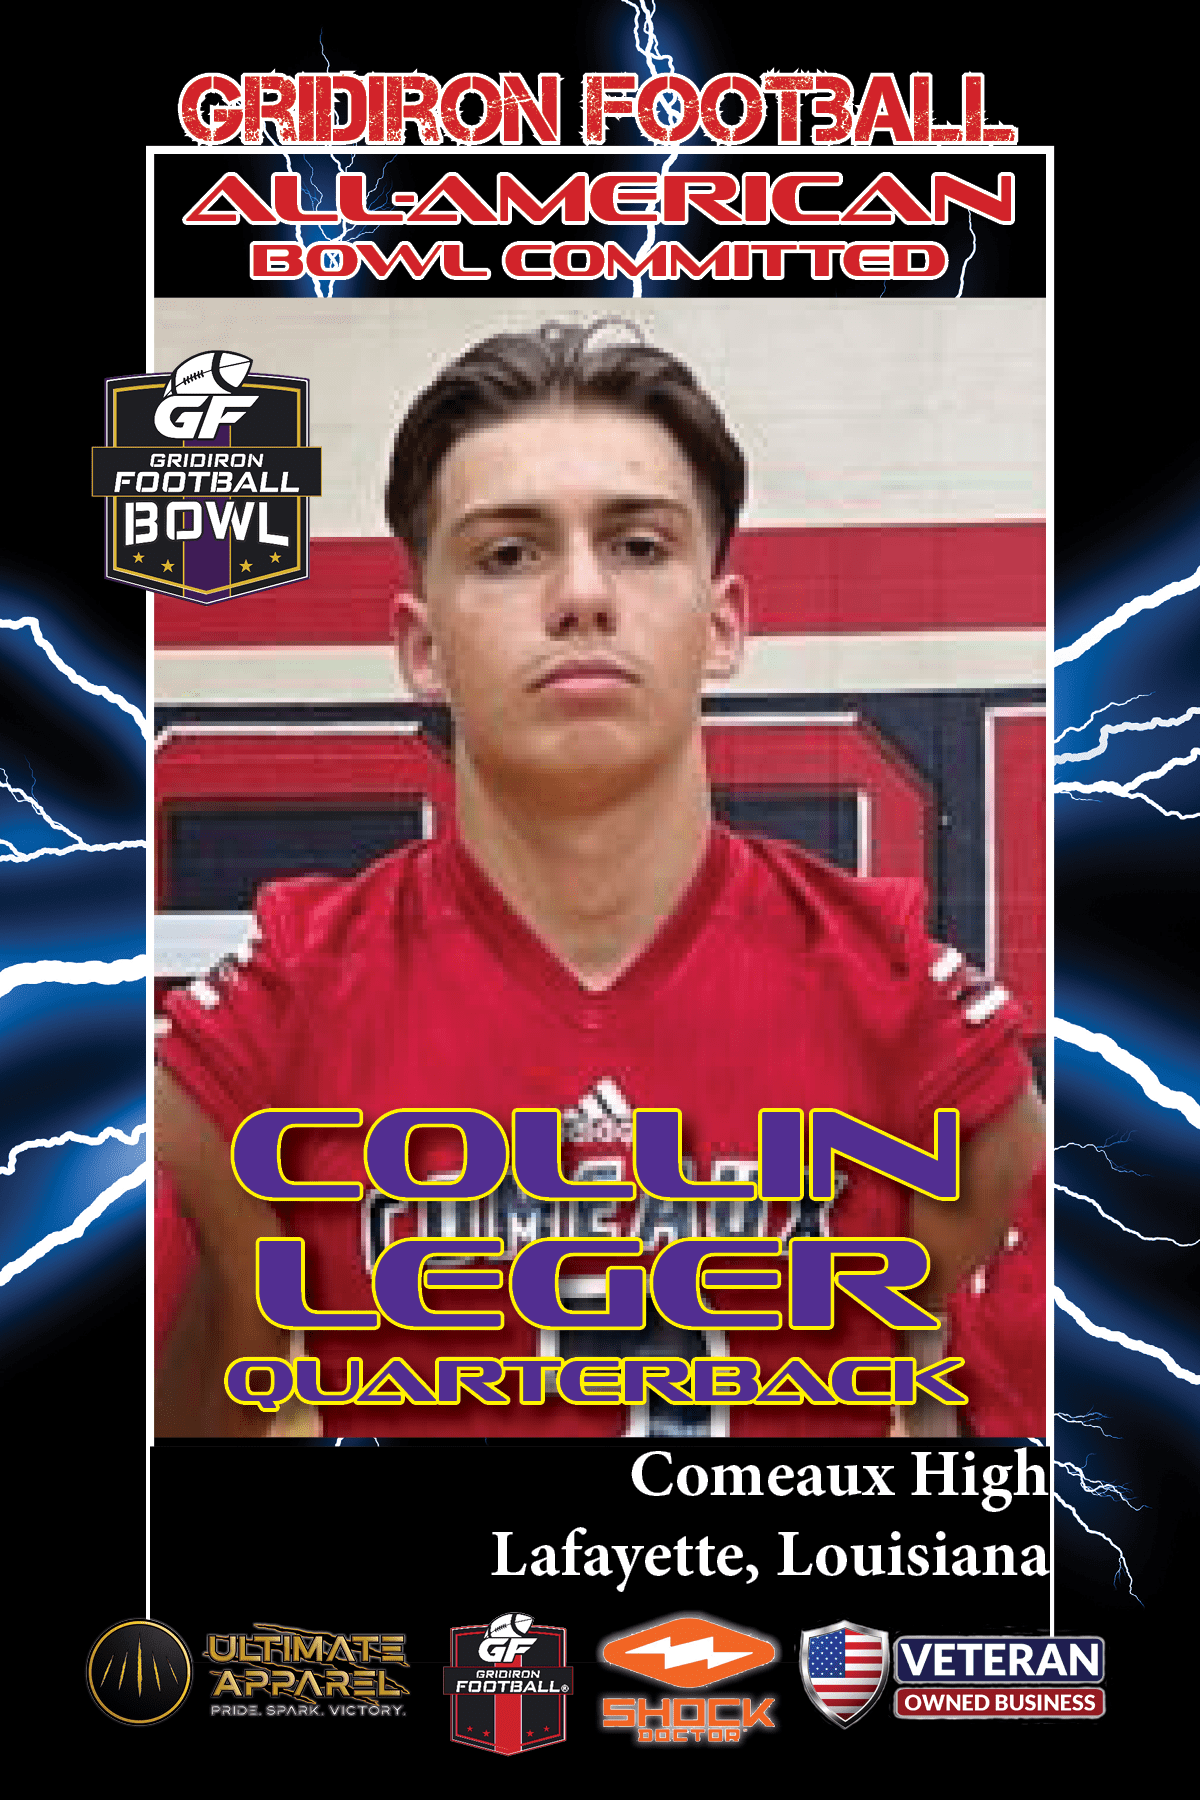 BREAKING NEWS: Comeaux High School (Lafayette, La.) QB Colin Leger has committed to play in the 2023 Gridiron Football All-American Bowl